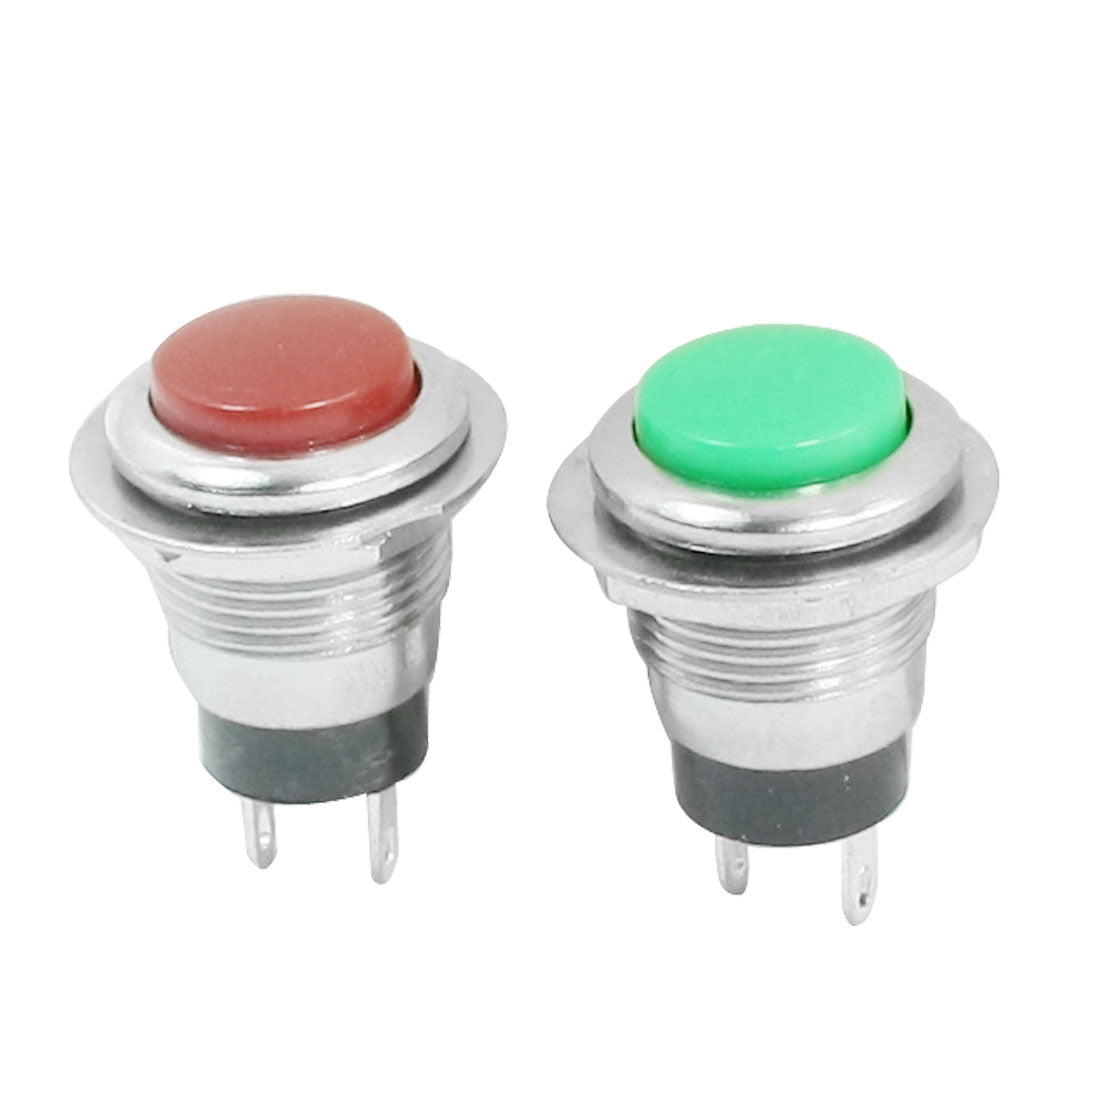 uxcell Uxcell 2pcs 2 Terminal 12mm Momentary SPST Red Green Push Button Switch AC125V 6A 250V 3A